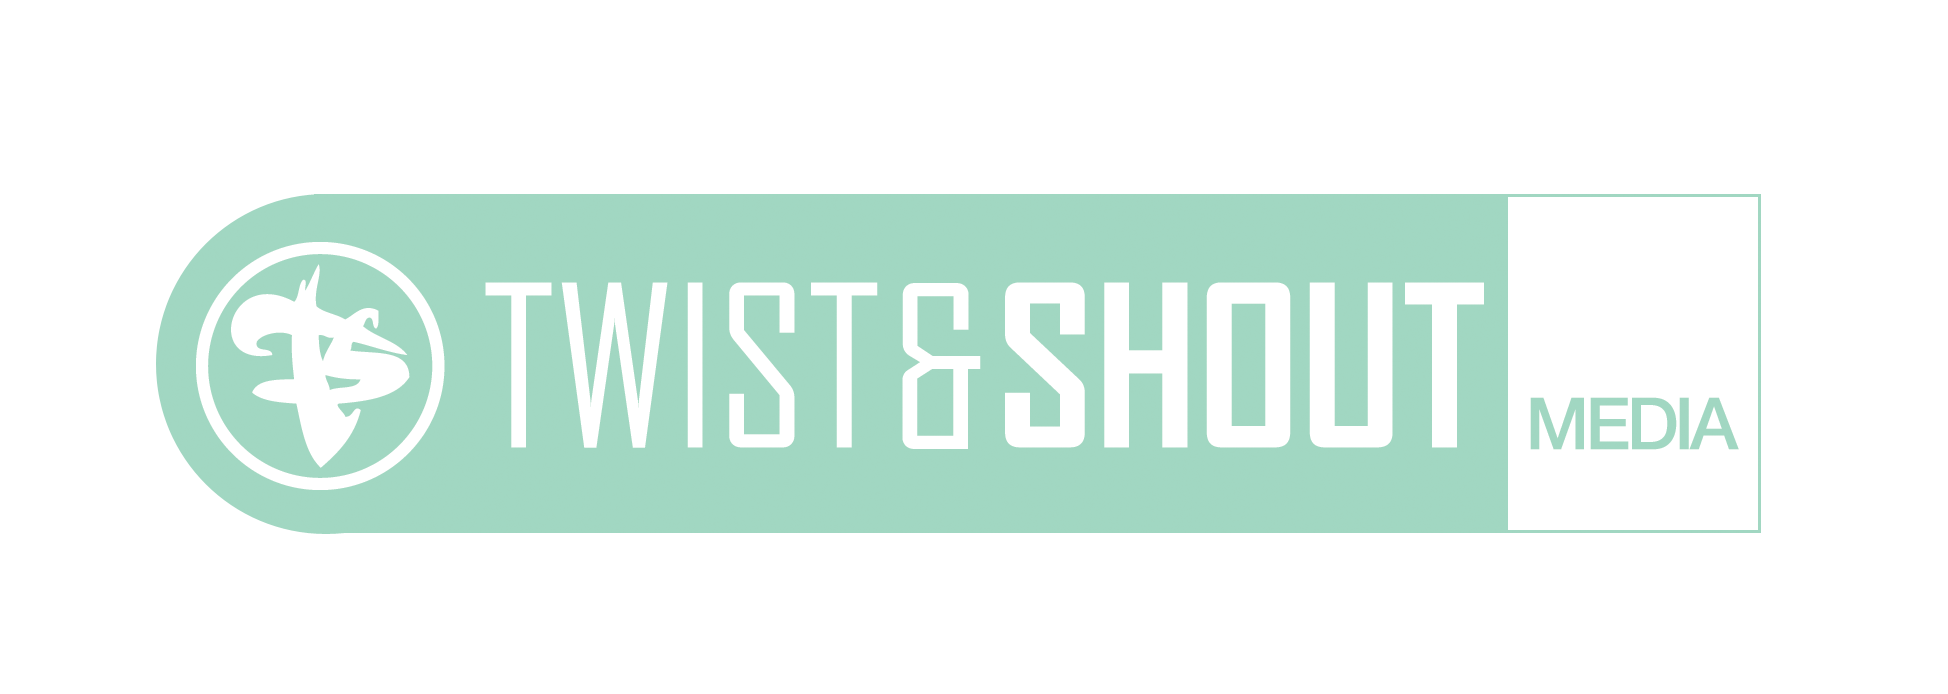 KnowBe4 Acquires Twist and Shout Group to Enhance High-Quality Video Production Capabilities